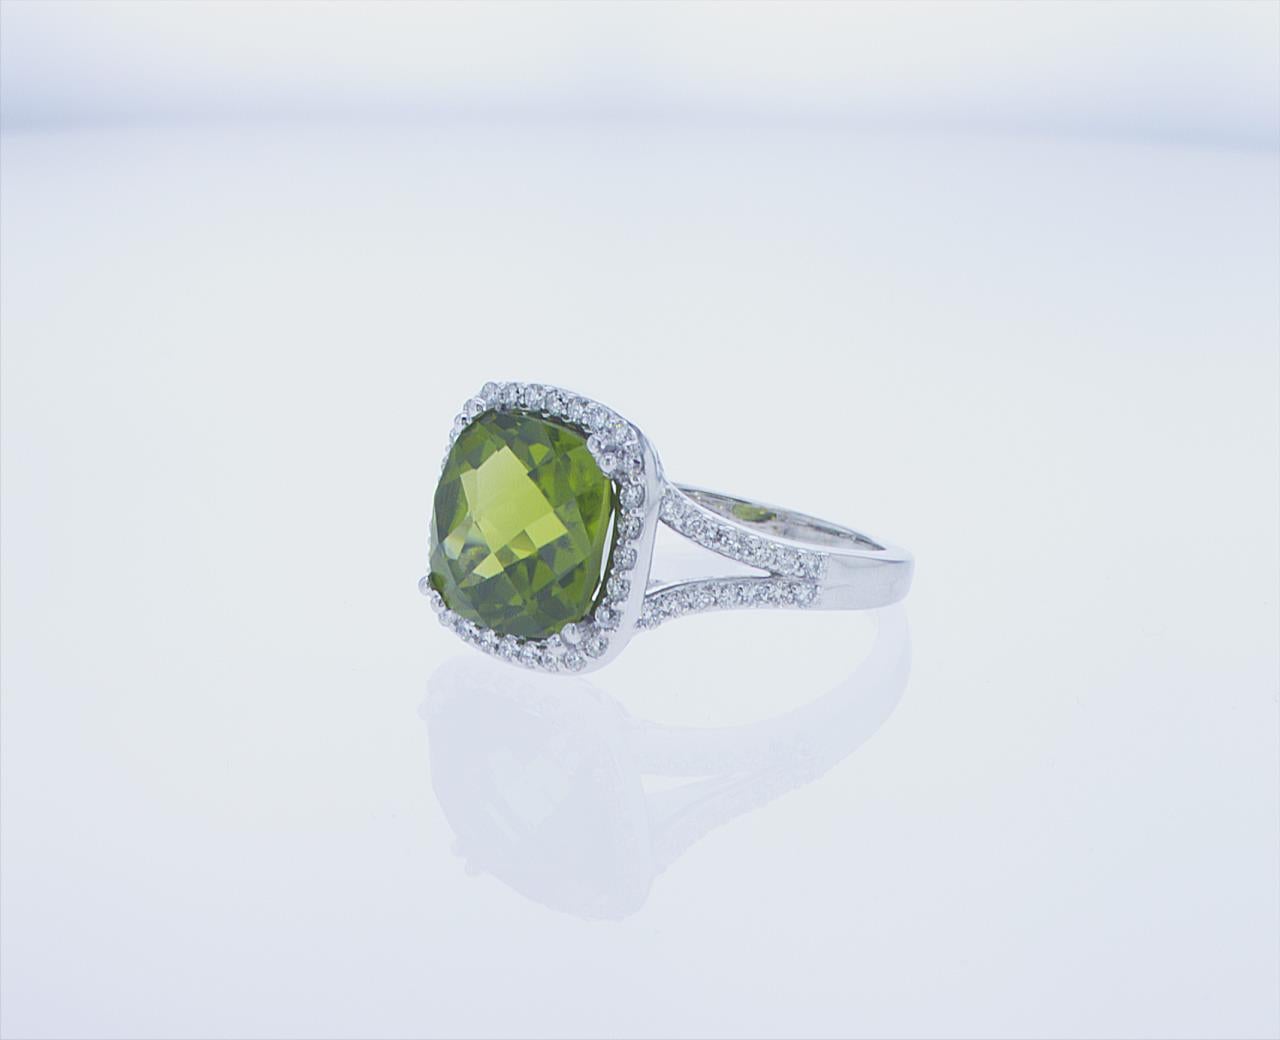 5.18ct Cushion Shape Peridot Cocktail Ring in 14k White Gold In New Condition For Sale In New York, NY